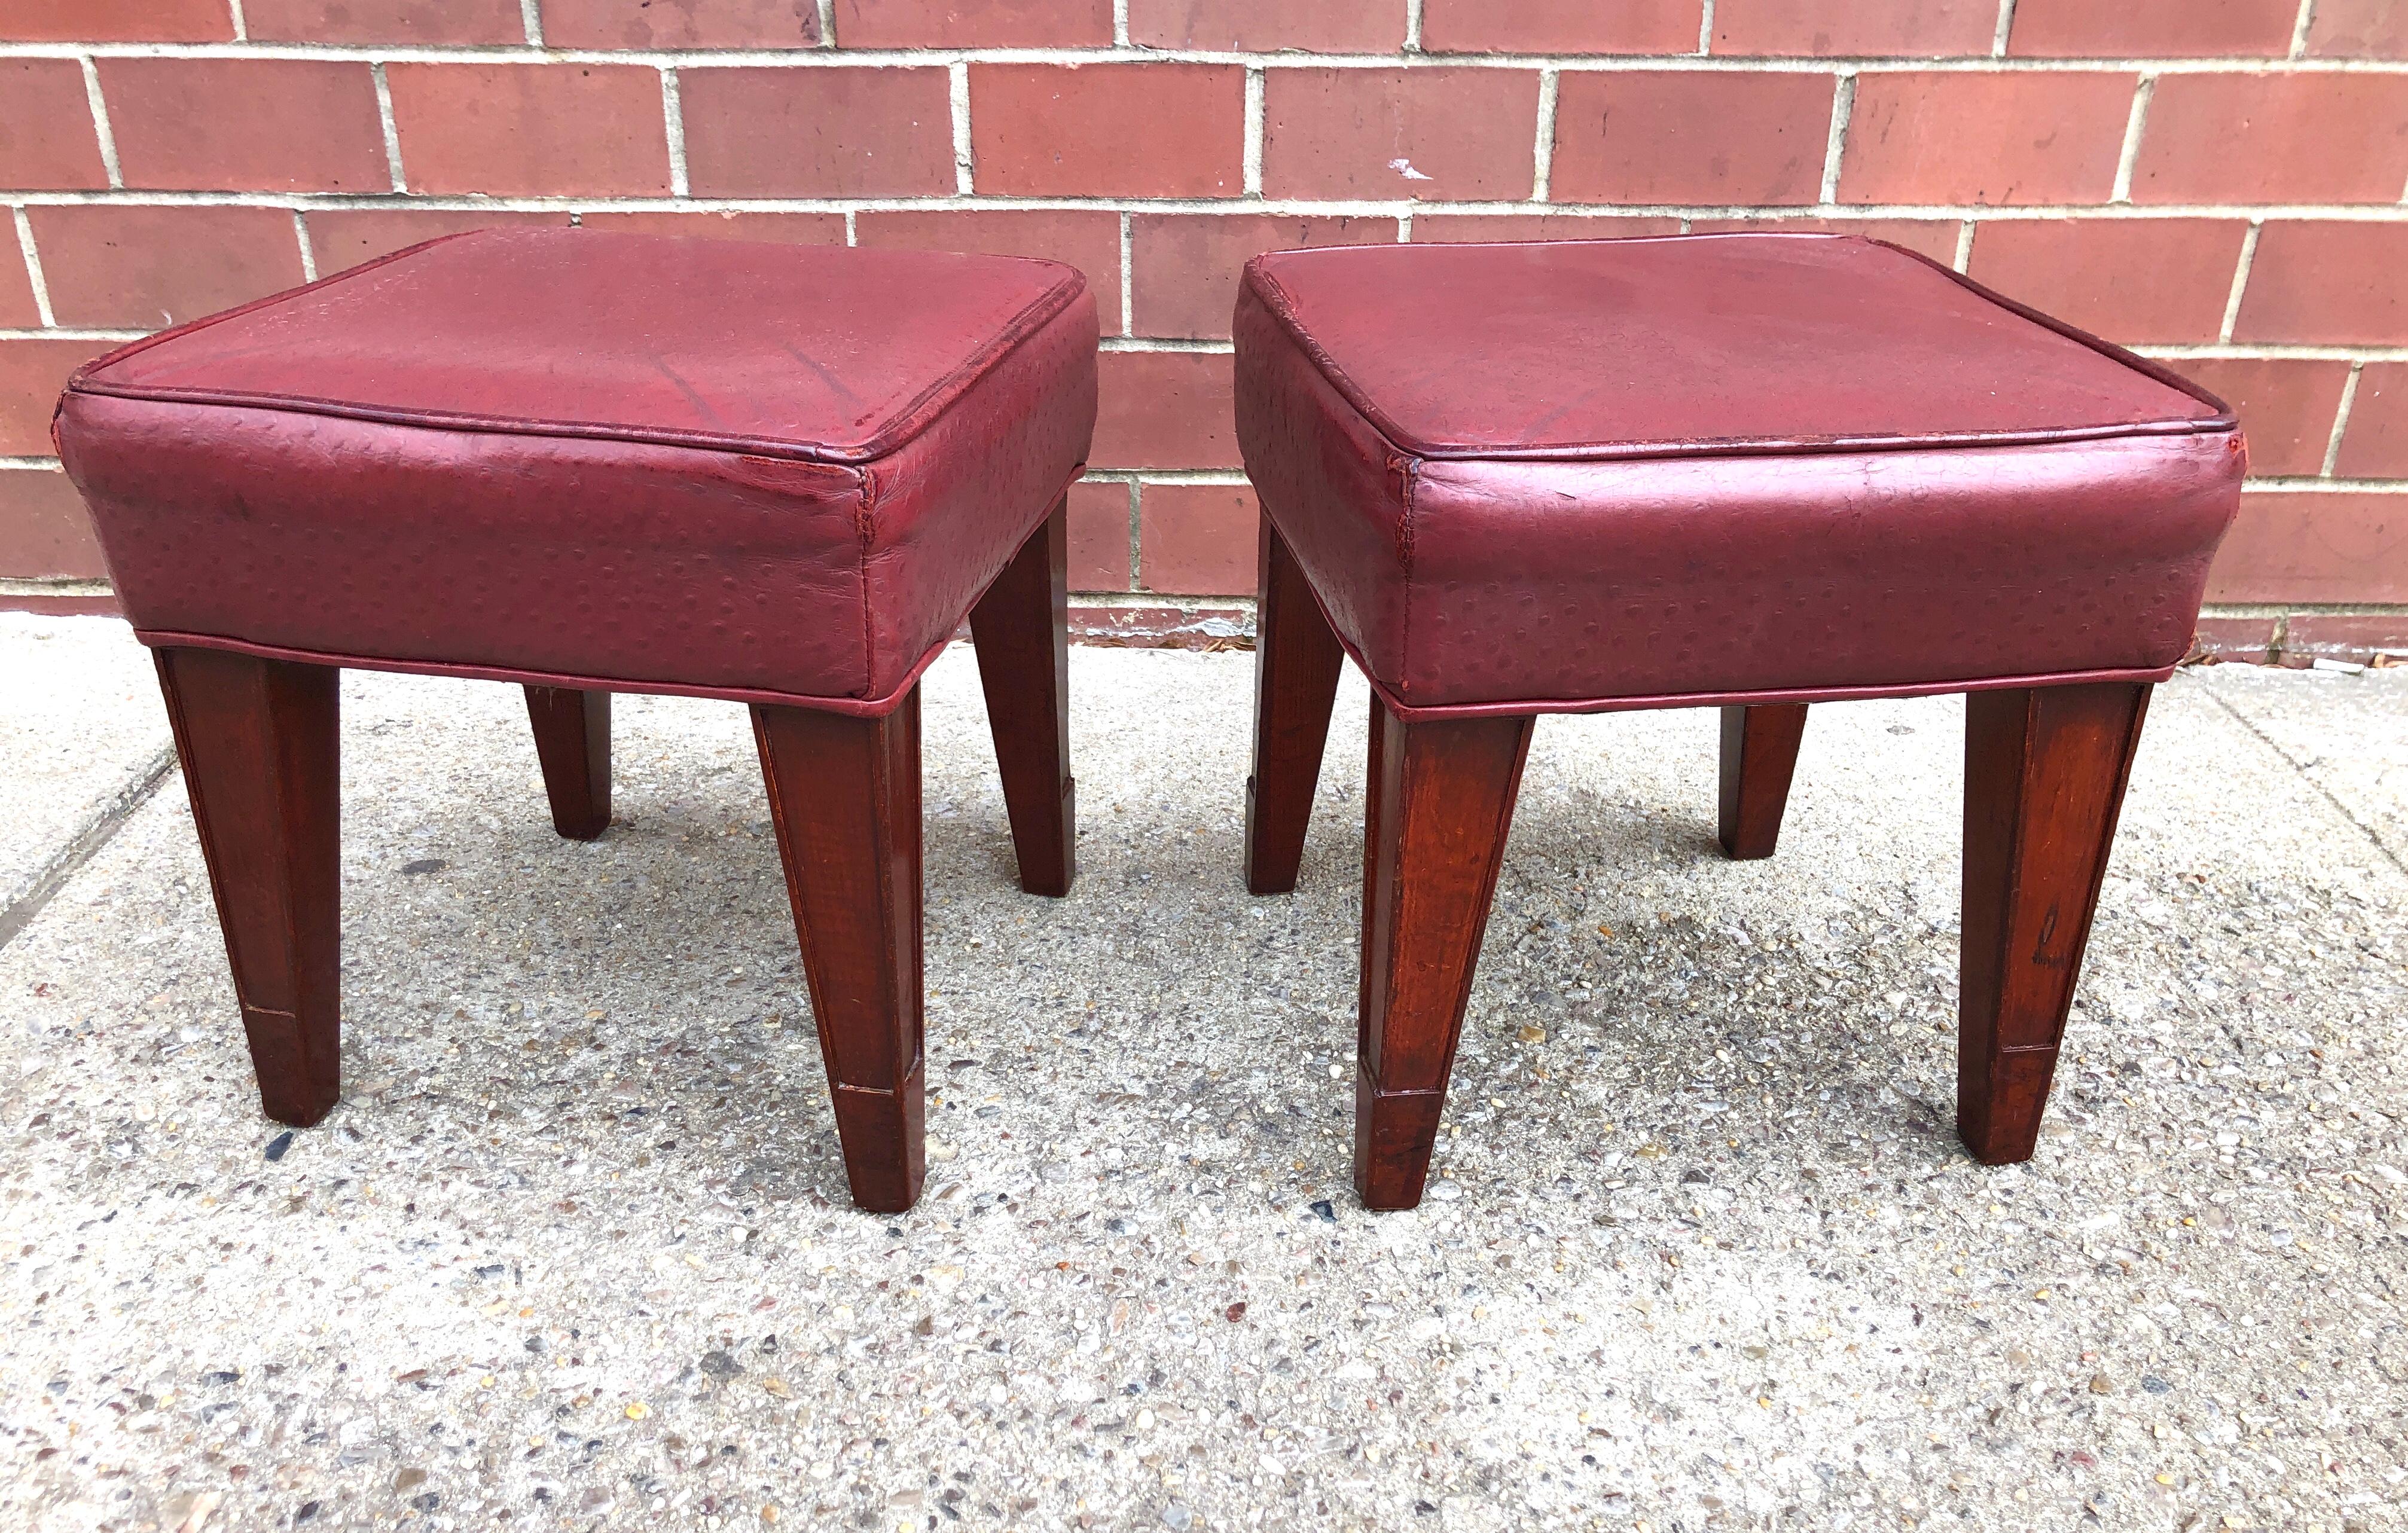 Mahogany stained wood, with burgundy Edelman ostrich leather seats, circa 1991. Two pairs available.